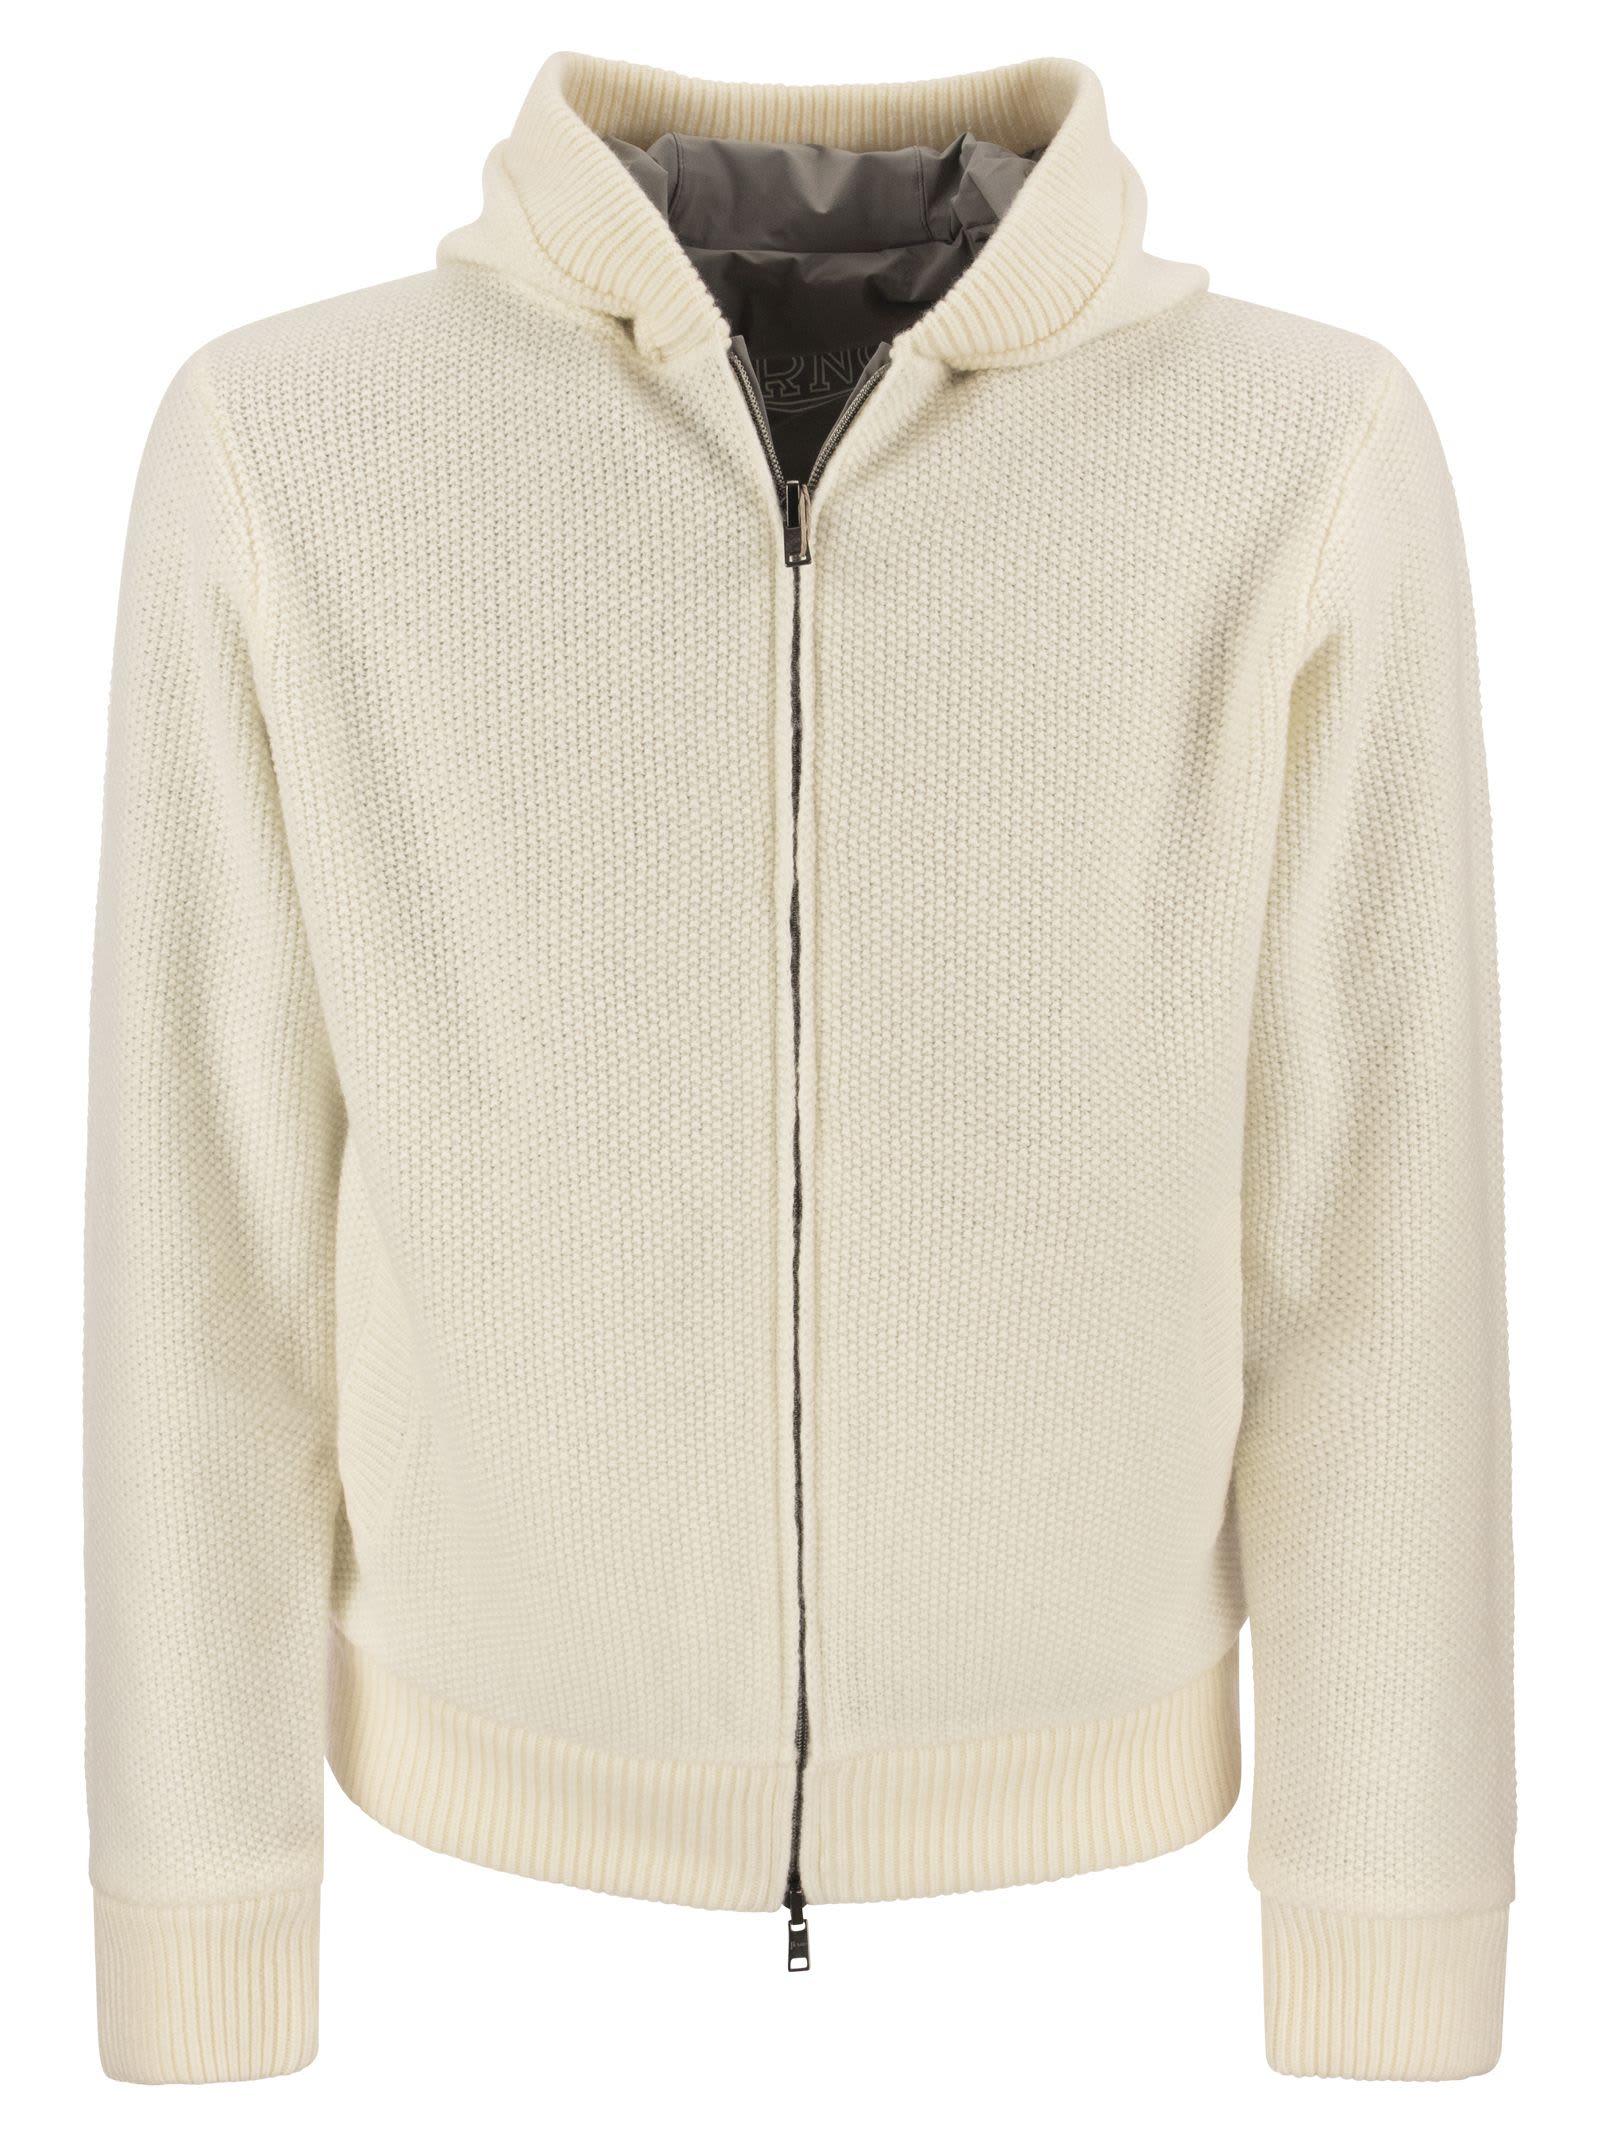 Herno Reversible Pure Wool Bomber Jacket in Cream (Natural) for Men | Lyst